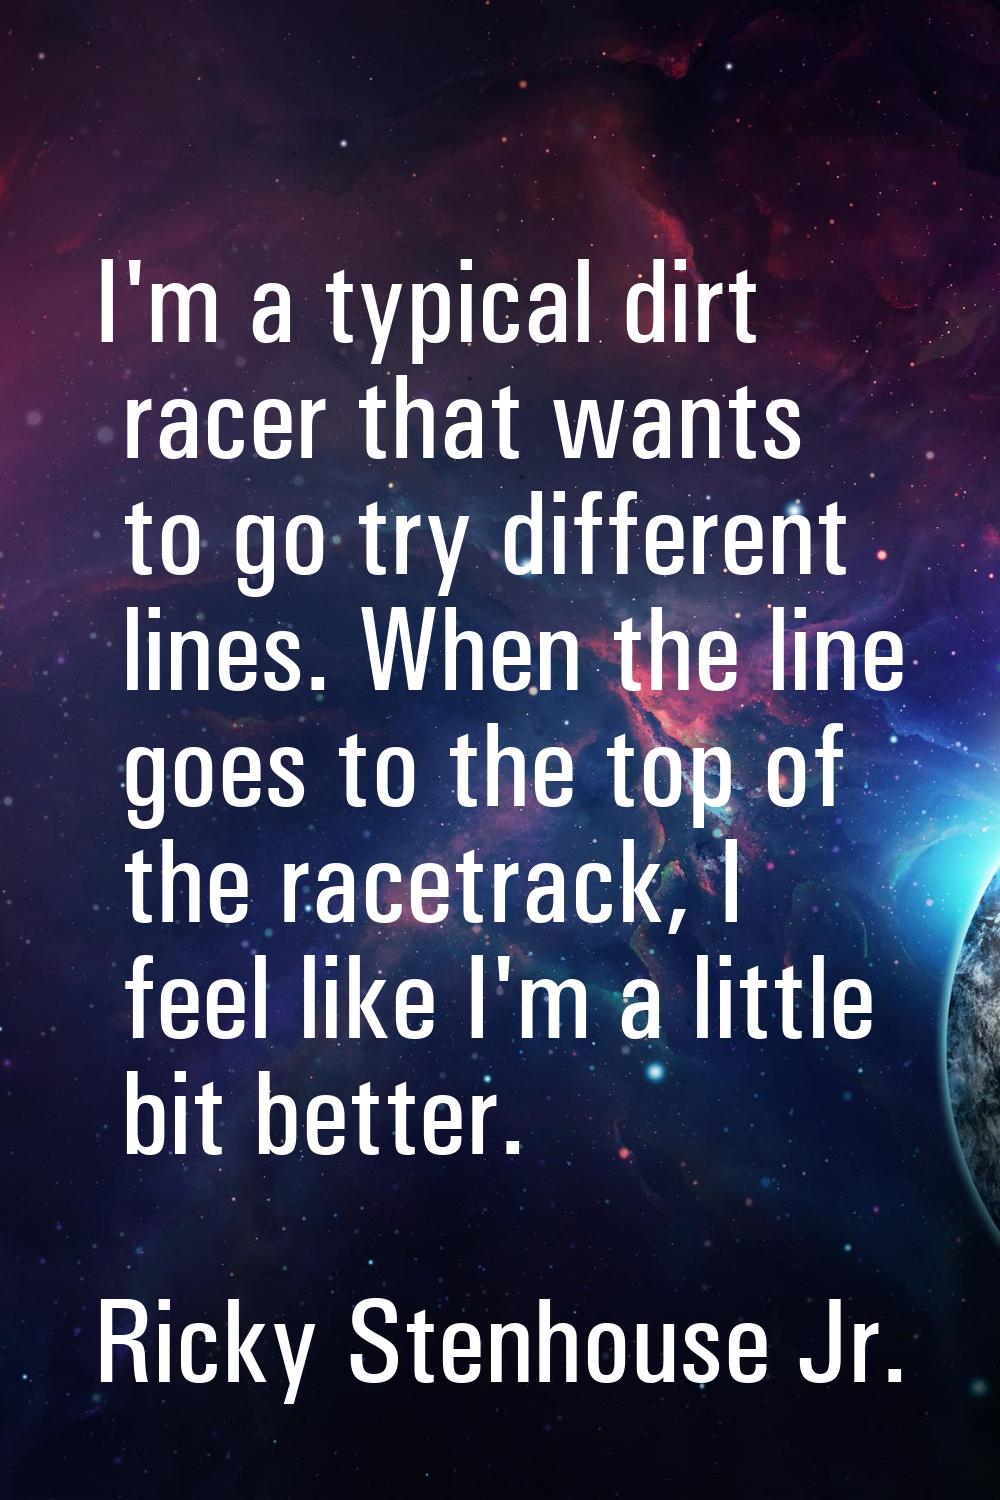 I'm a typical dirt racer that wants to go try different lines. When the line goes to the top of the